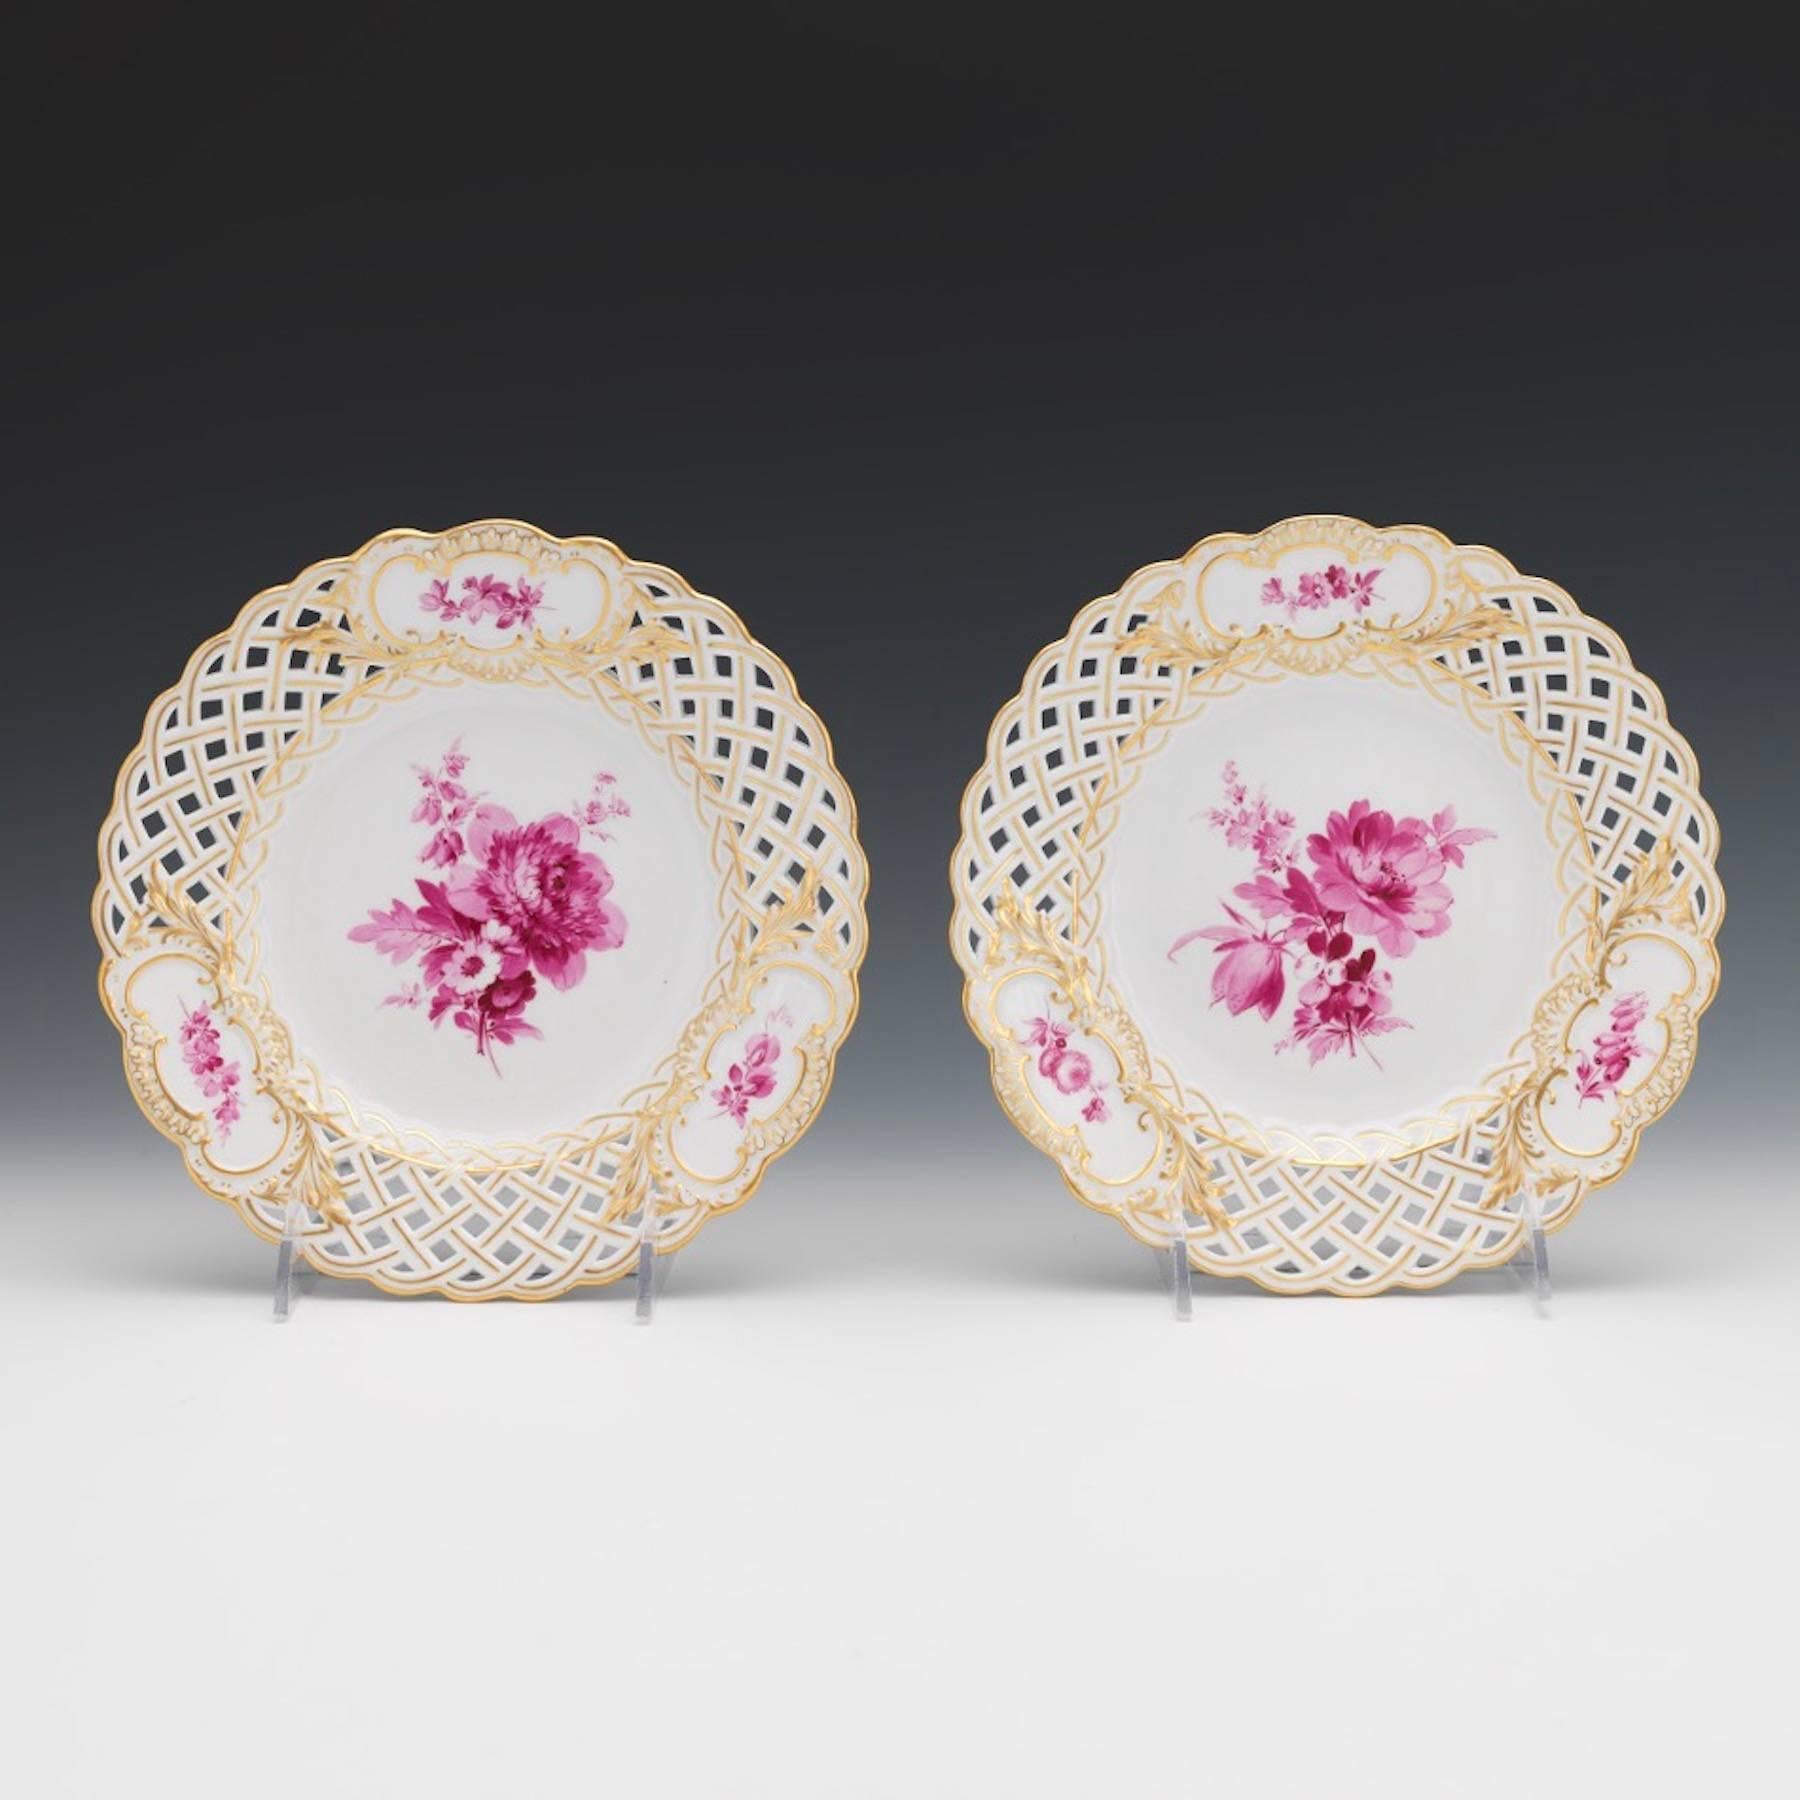 Hand-Painted Eight Meissen Reticulated Painted Floral Motif Plates, in a Rose Palette